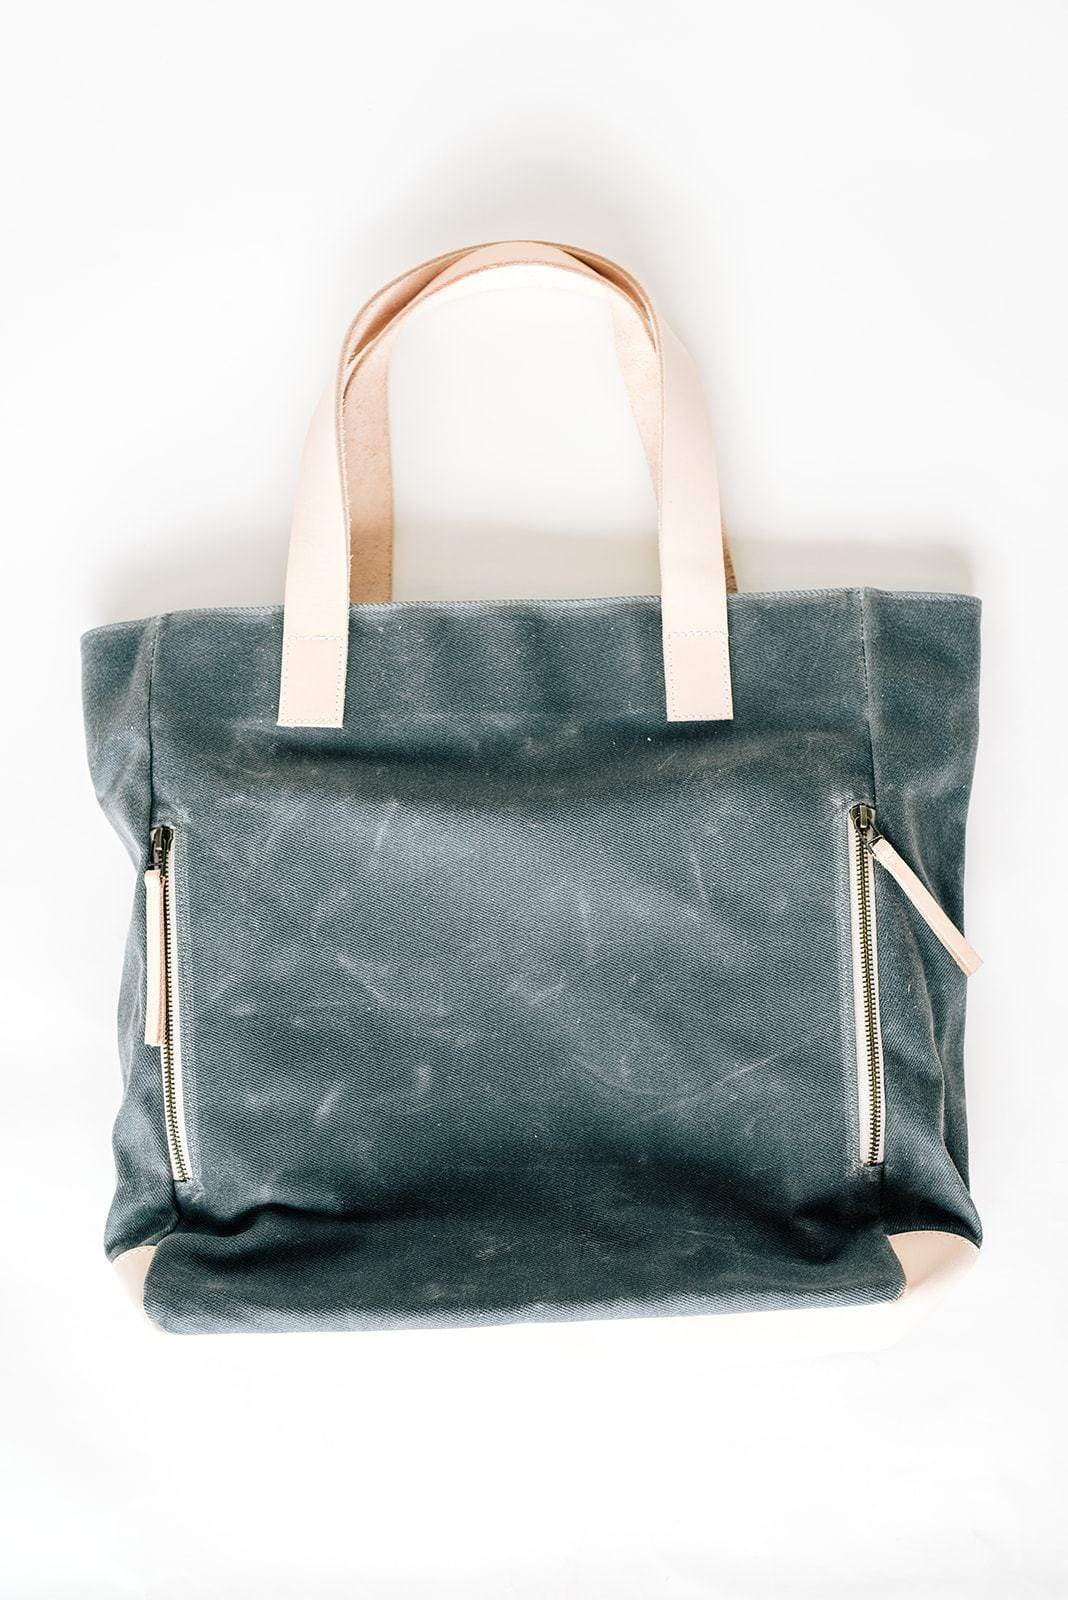 Charcoal Grey Wax Canvas Tote Bag - The Morning Person - notebooks &amp; honey